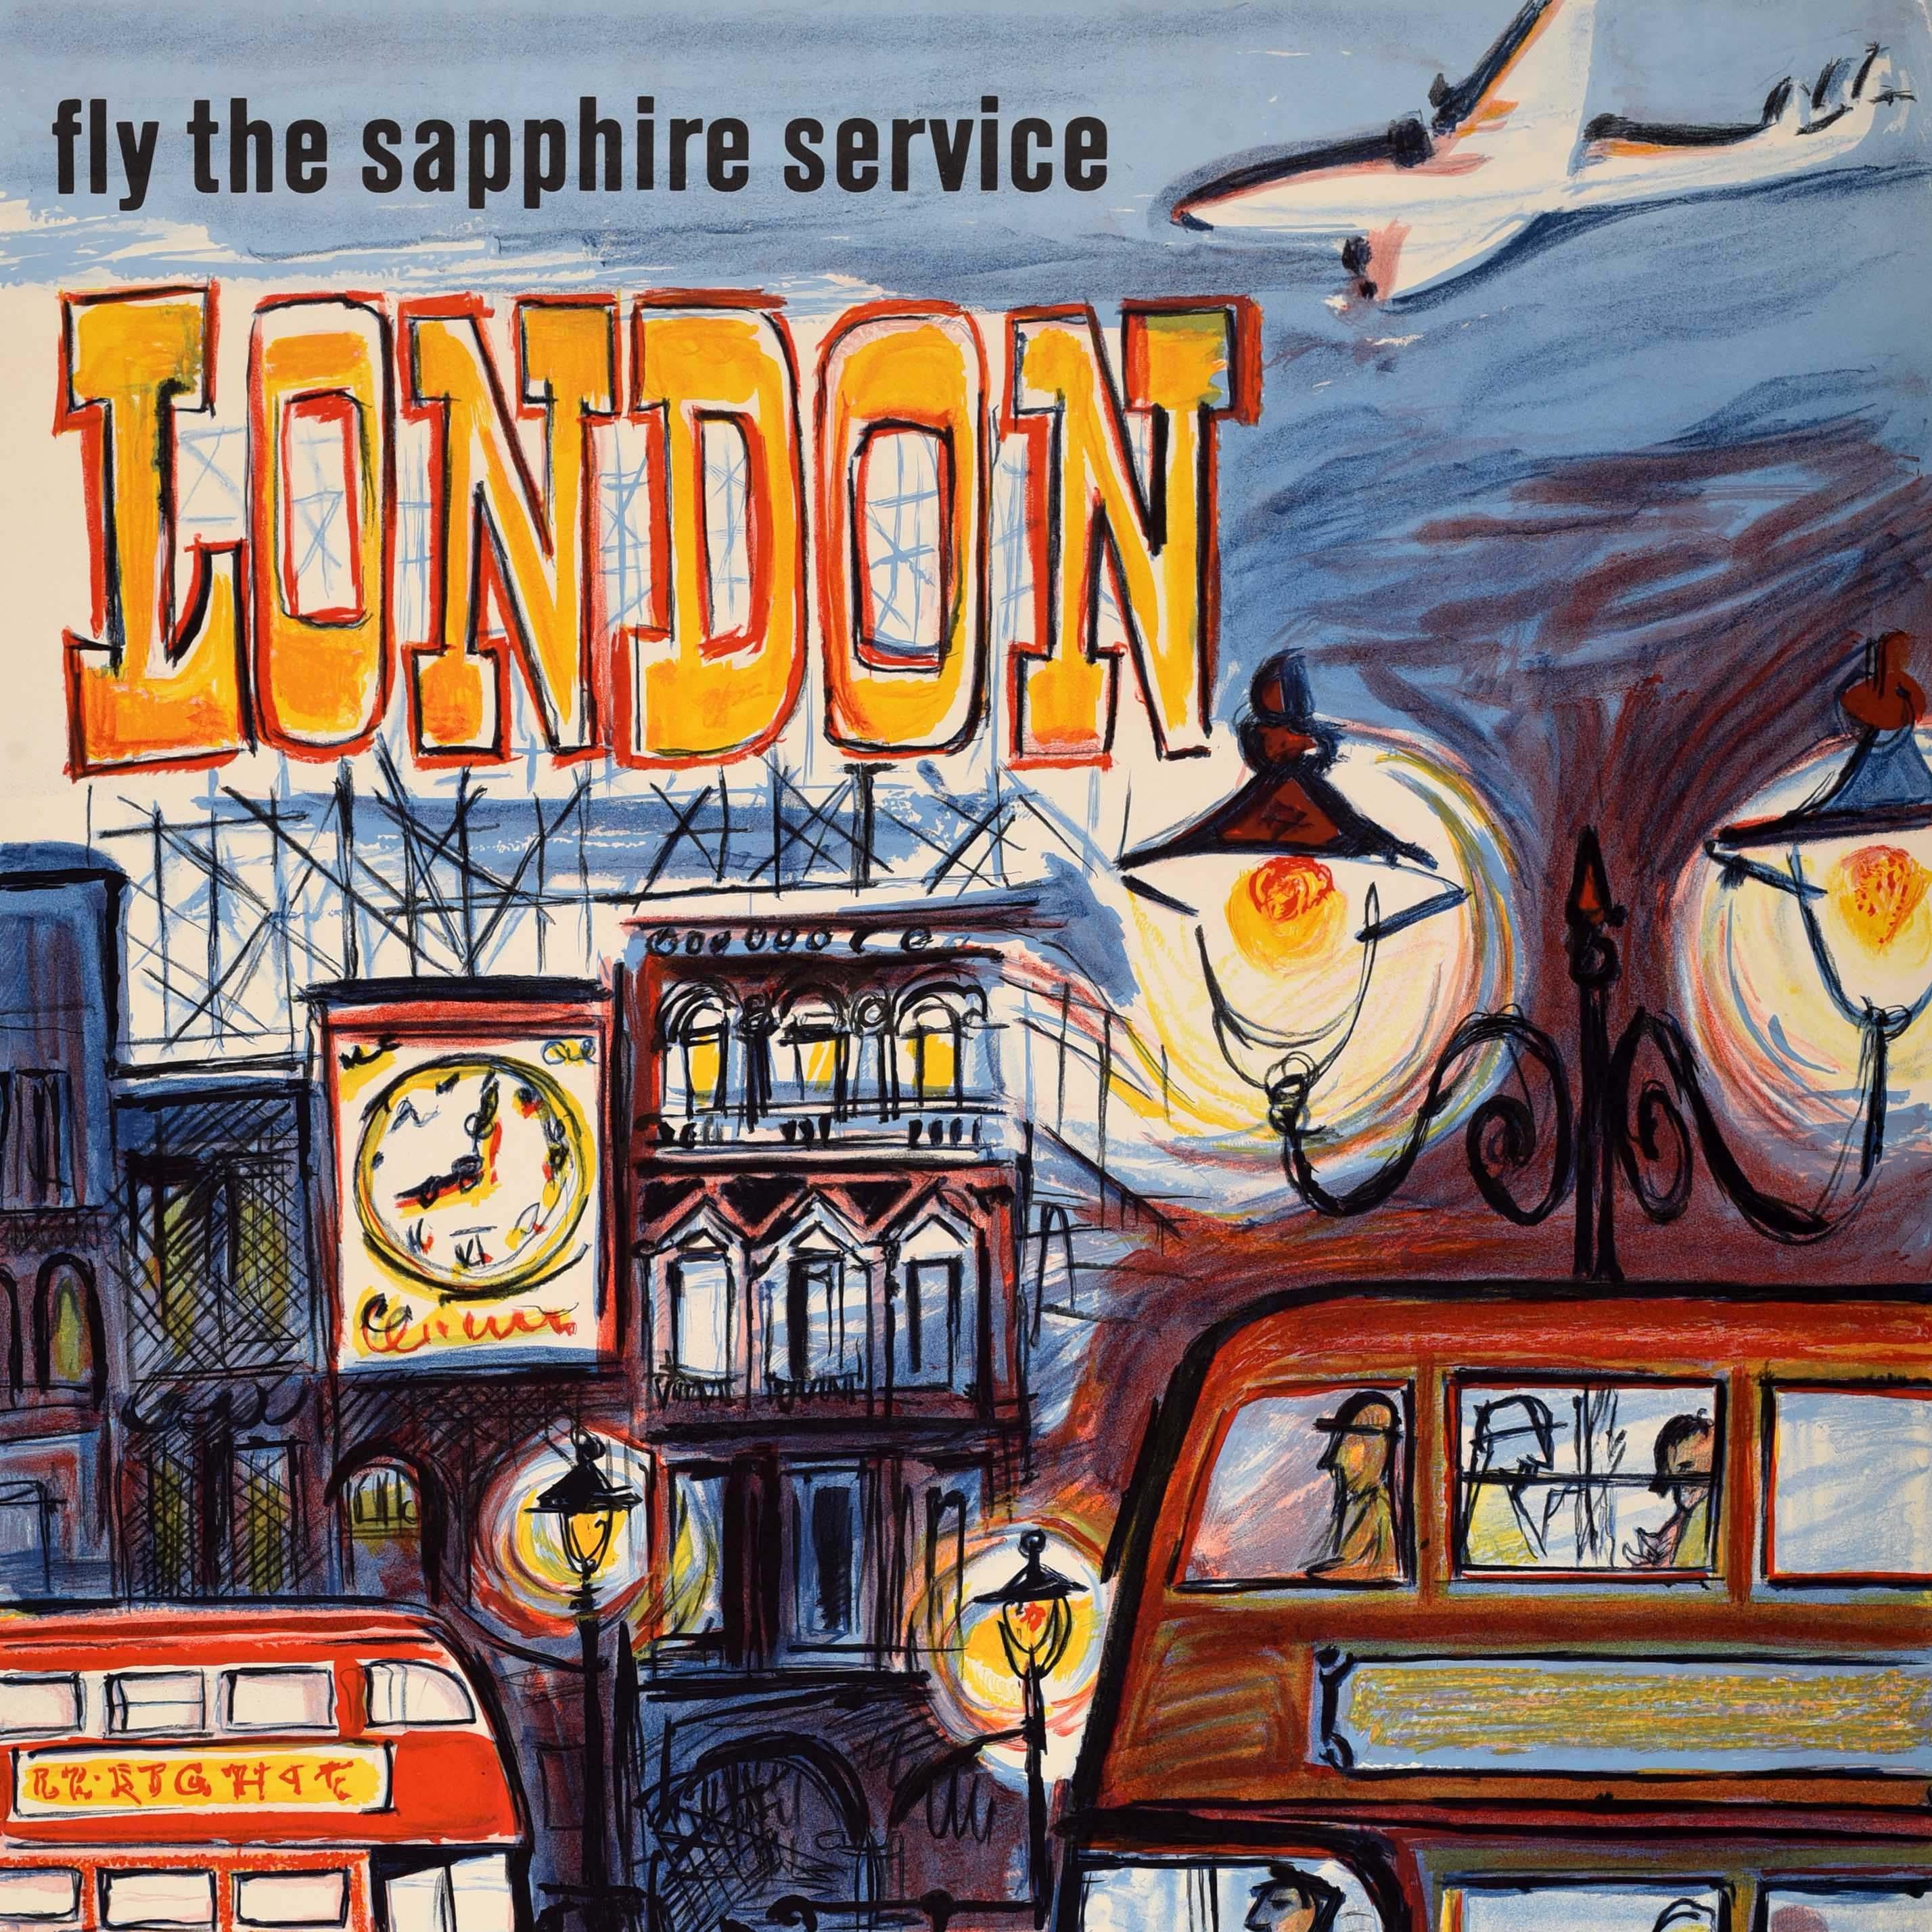 Original vintage travel poster issued by Air Ceylon - Fly the Sapphire Service to London - featuring artwork by Mart Kempers (1924-1993) depicting a busy London city street scene with a delivery van, a taxi laden with tourist luggage and passengers